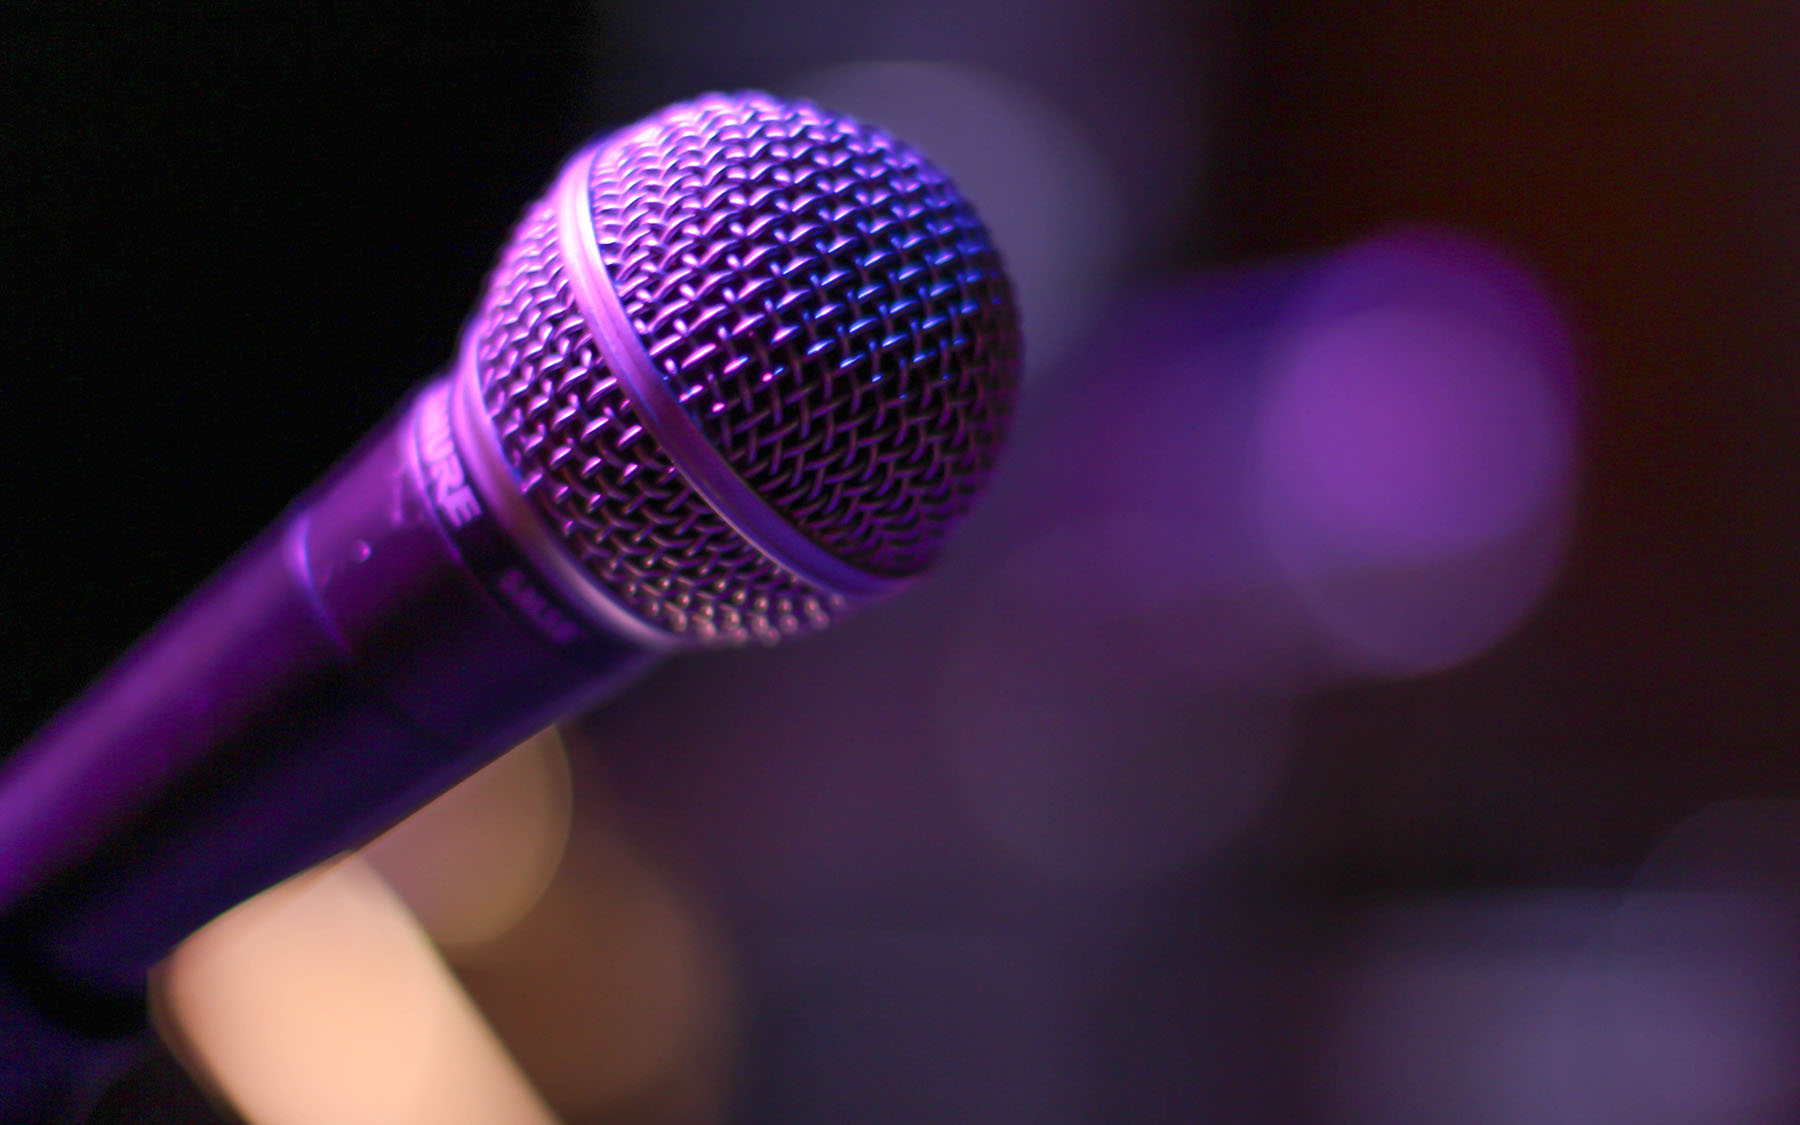 Microphone on stage with purple light